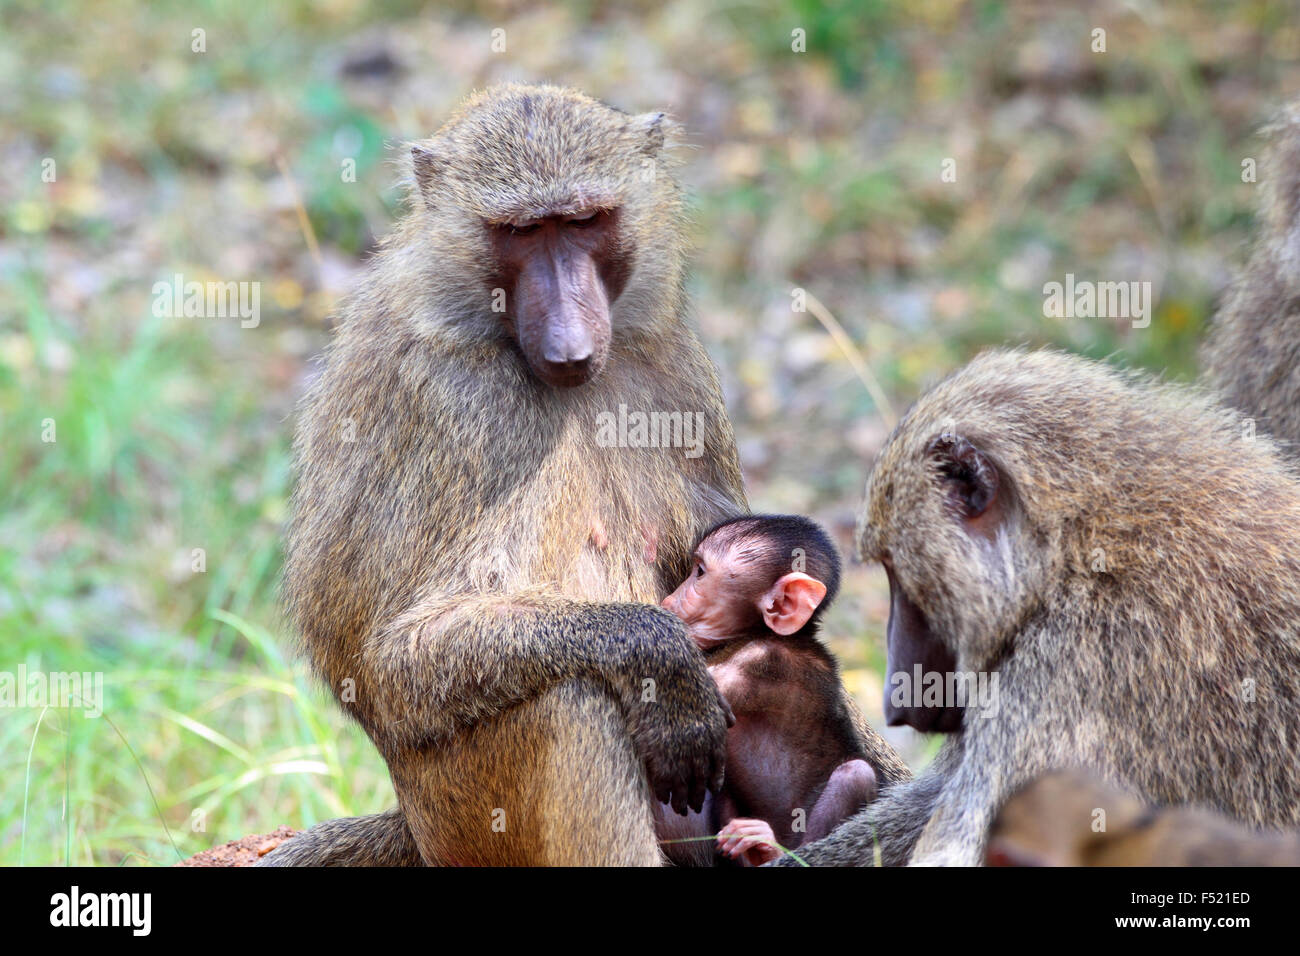 Olive Baboon (Papio anubis) in Mole National park, Ghana, West Africa Stock Photo